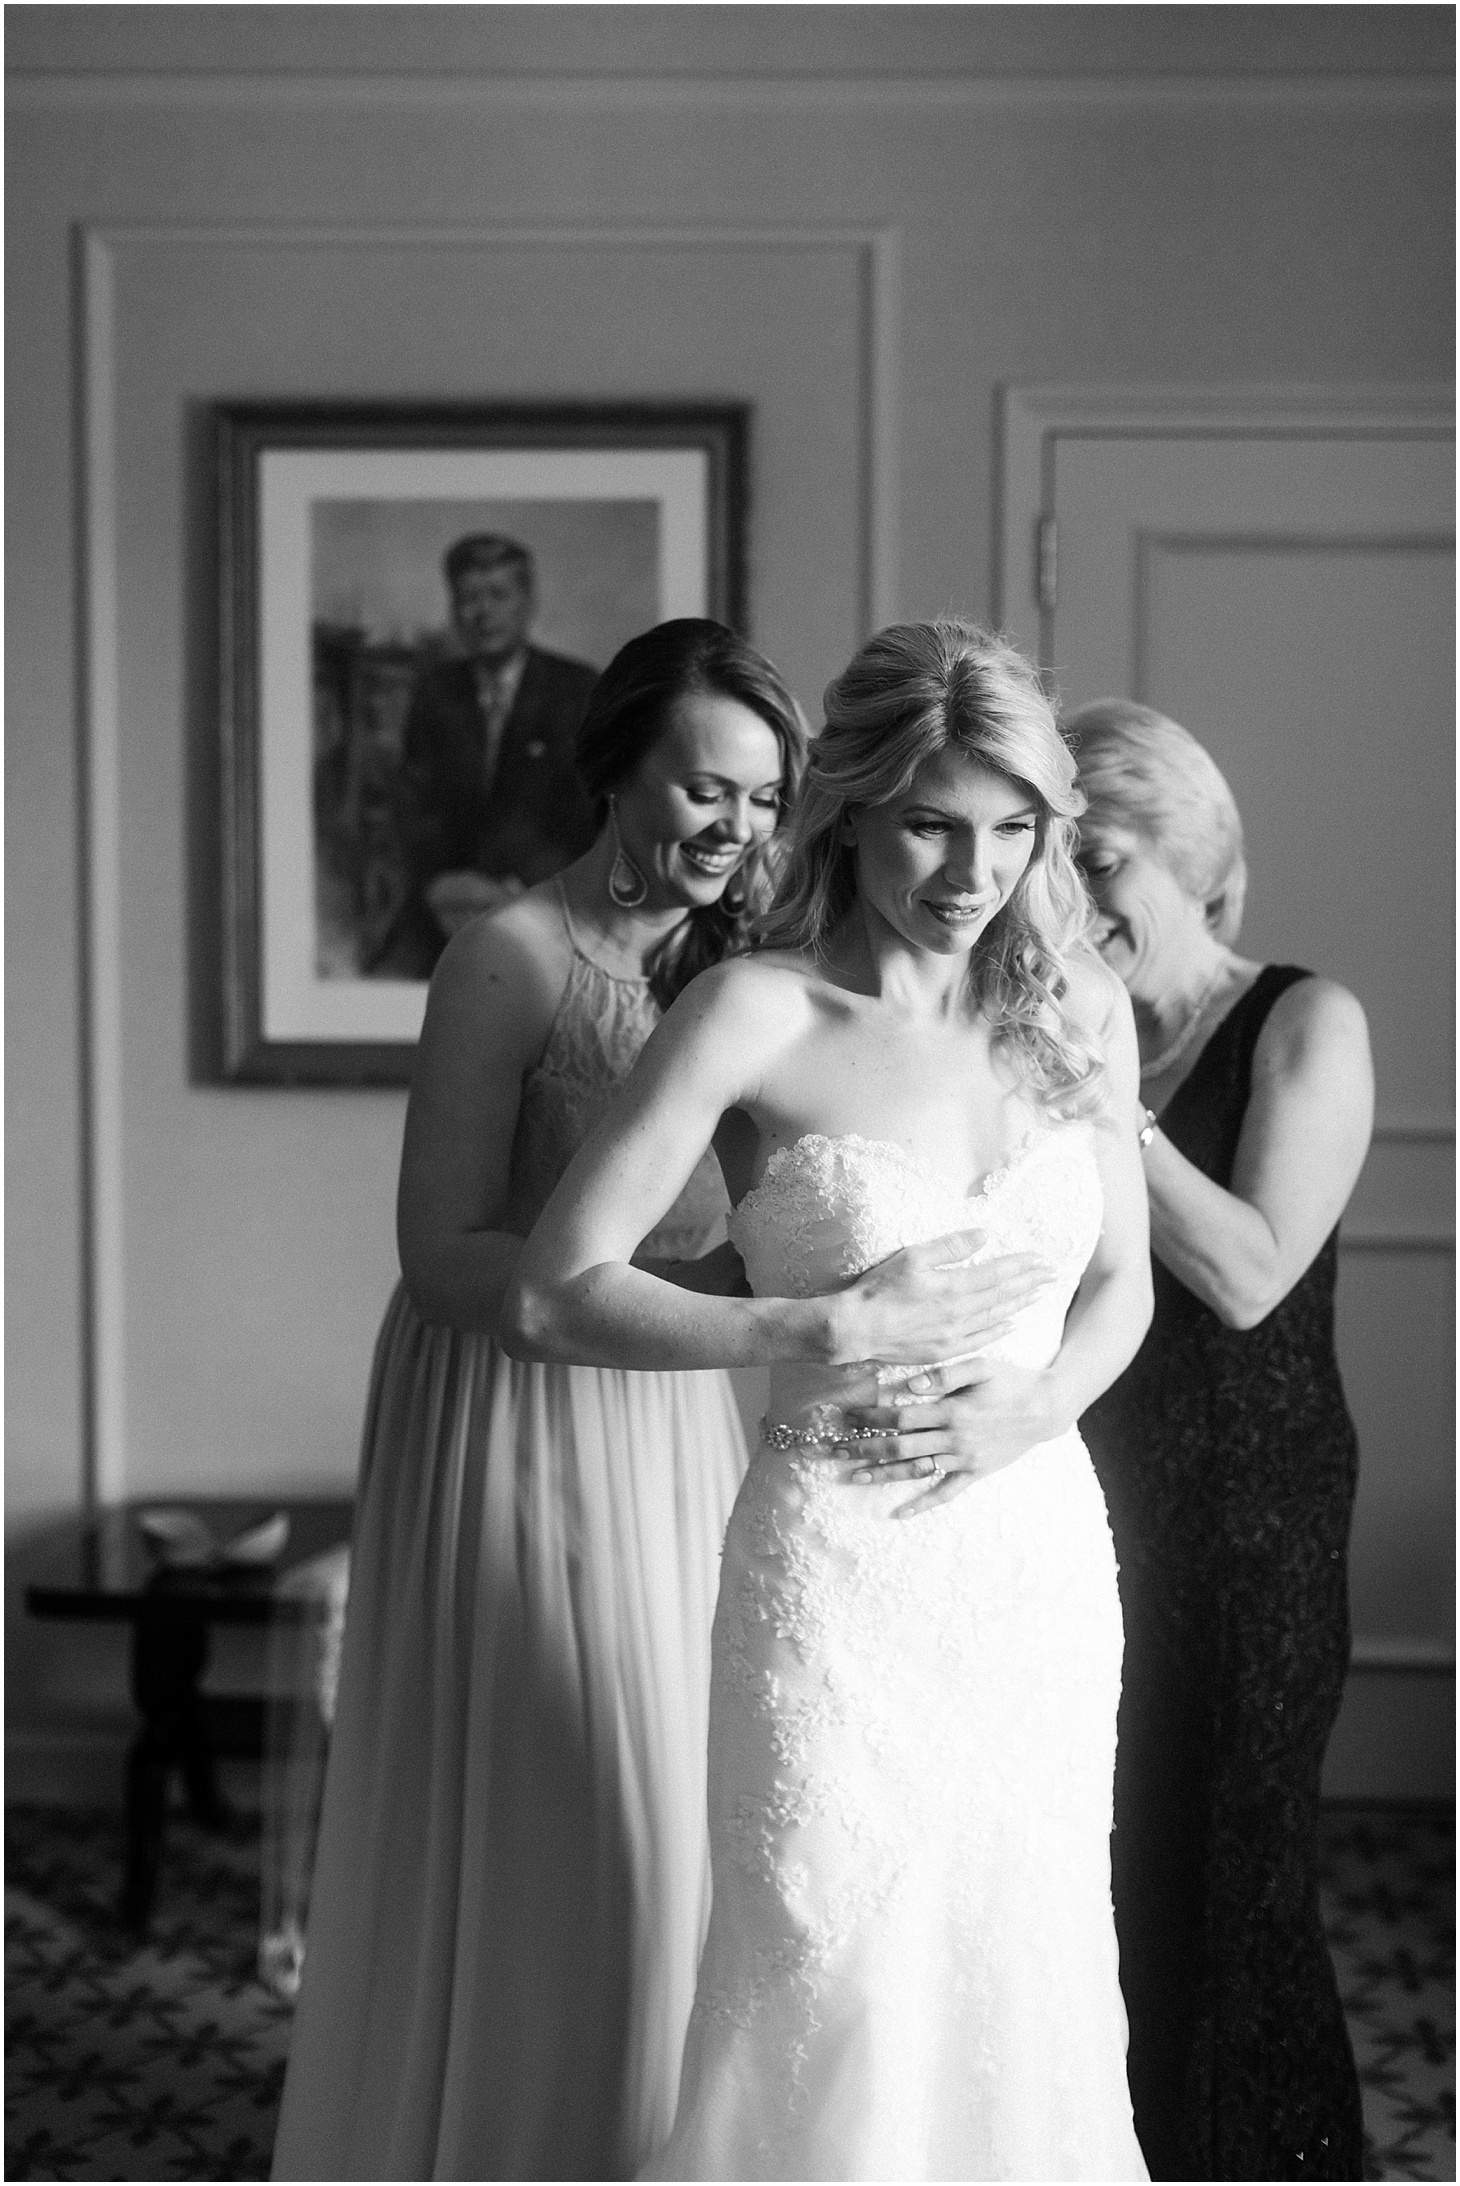 Bride Getting Ready at Willard Intercontinental Hotel in DC, Navy and Blush Summer Wedding at the Army and Navy Club, Ceremony at Capitol Hill Baptist Church, Sarah Bradshaw Photography, DC Wedding Photographer